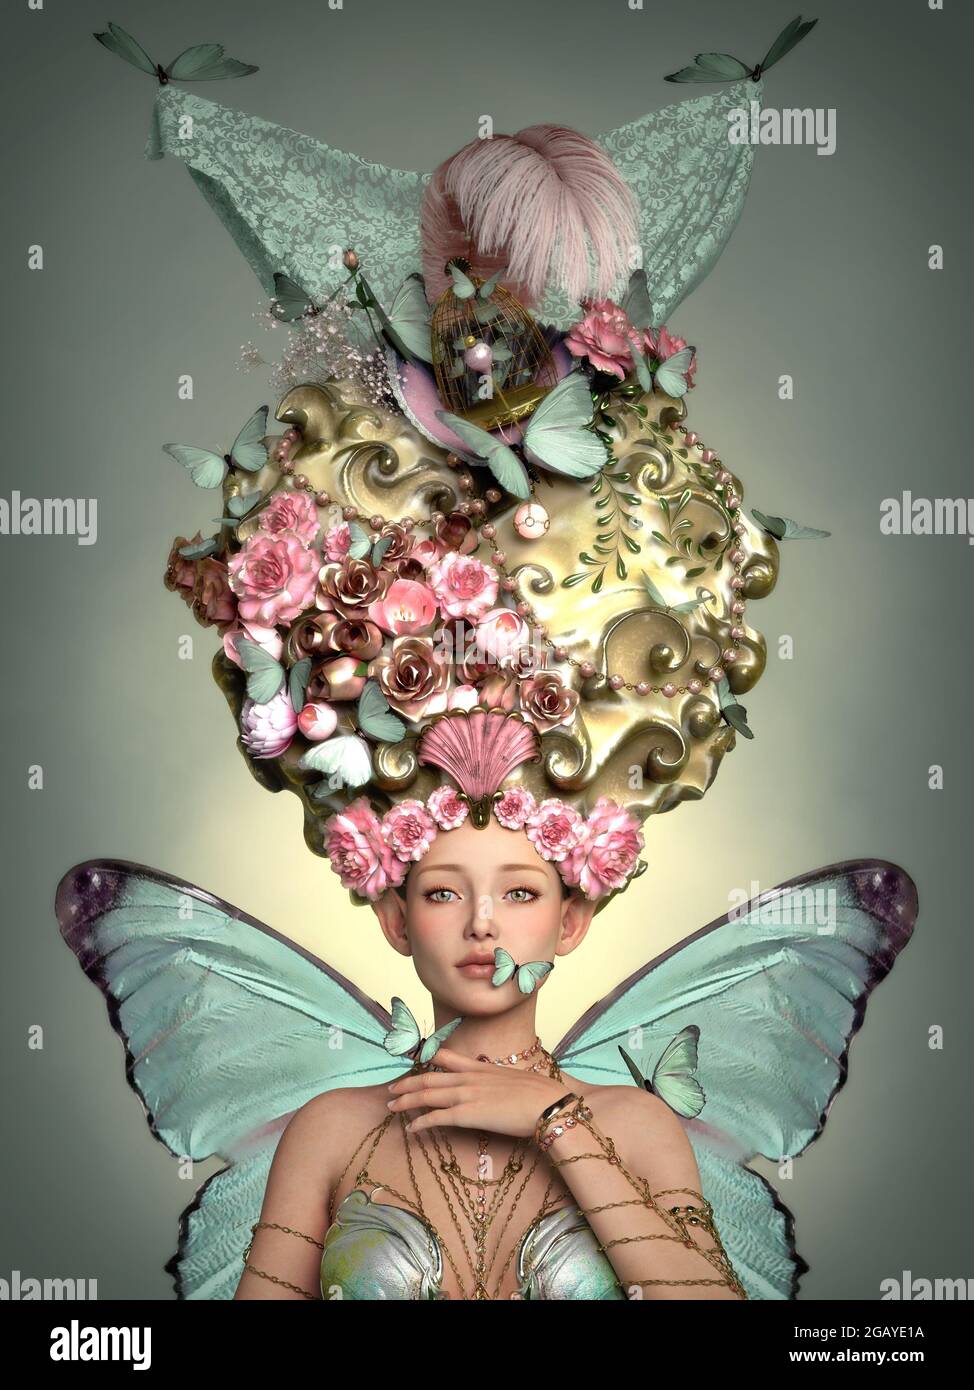 3d computer graphics of a a lady with a rococo headdress and butterflies Stock Photo